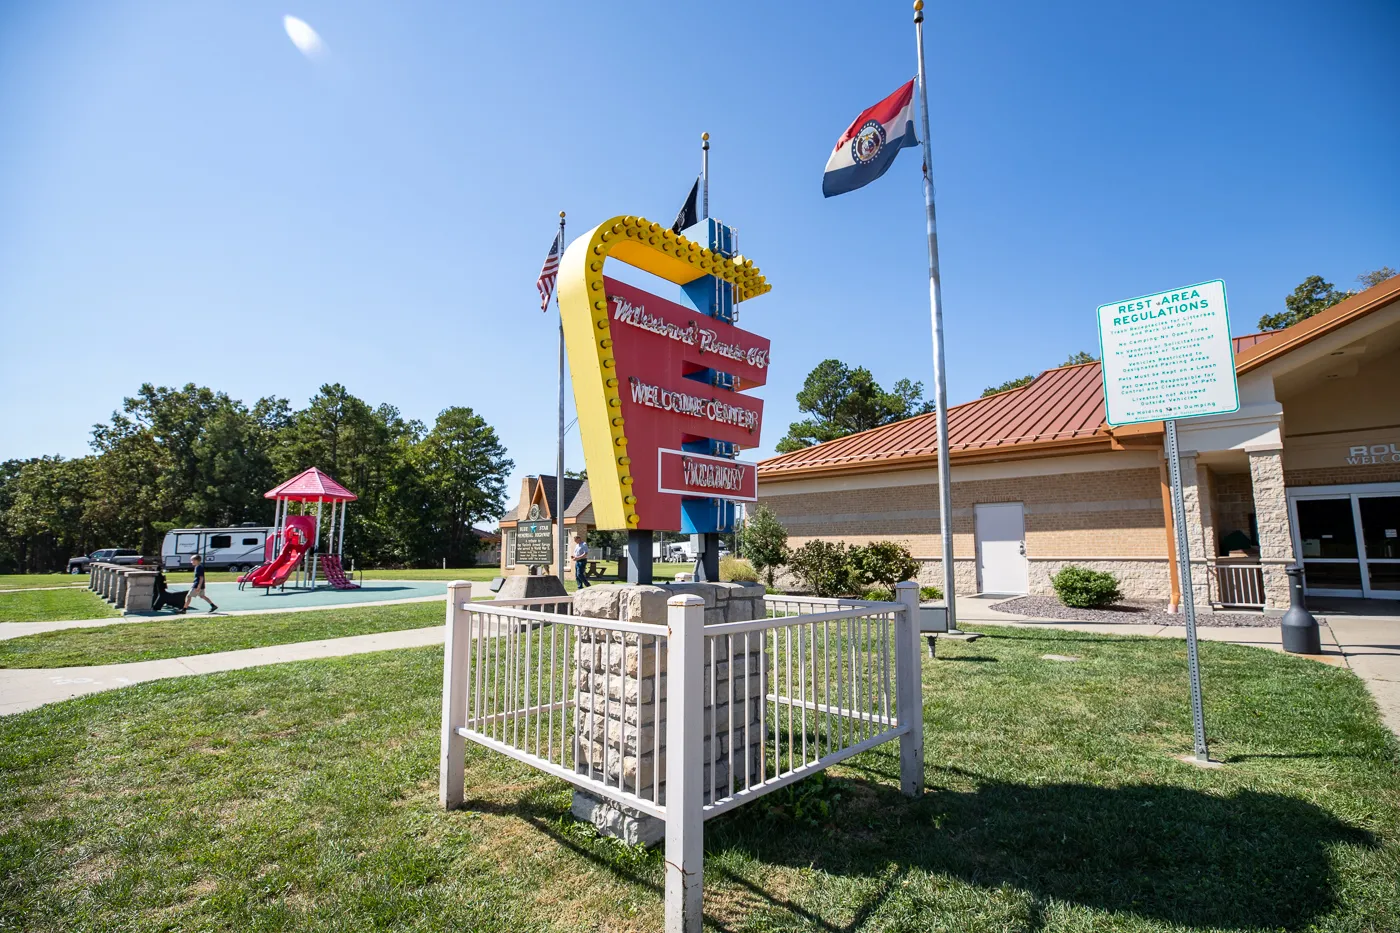 Replica of the Munger Moss Motel Sign at the Missouri Route 66 Welcome Center in Conway, Missouri - Route 66 themed rest stop in Missouri